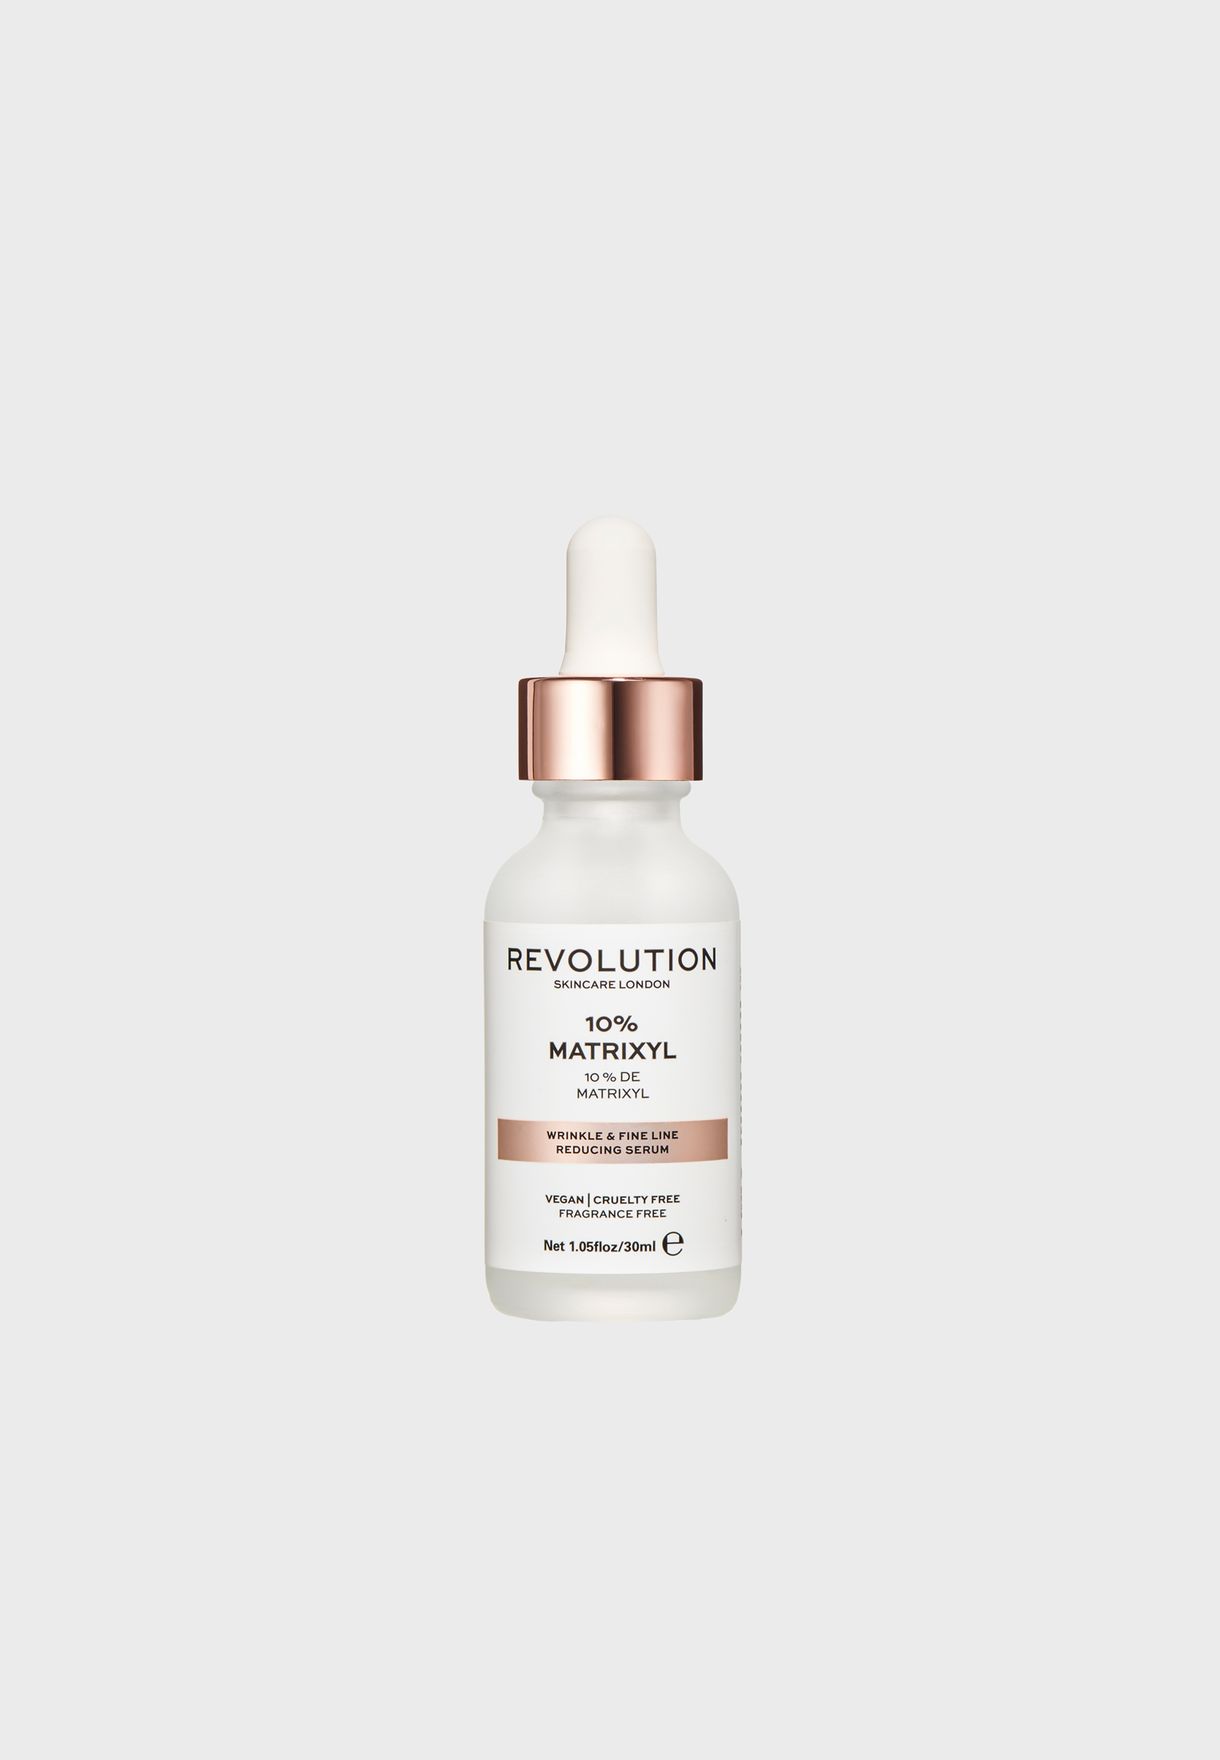 Wrinkle And Fine Line Reducing Serum - 10% Matrixyl